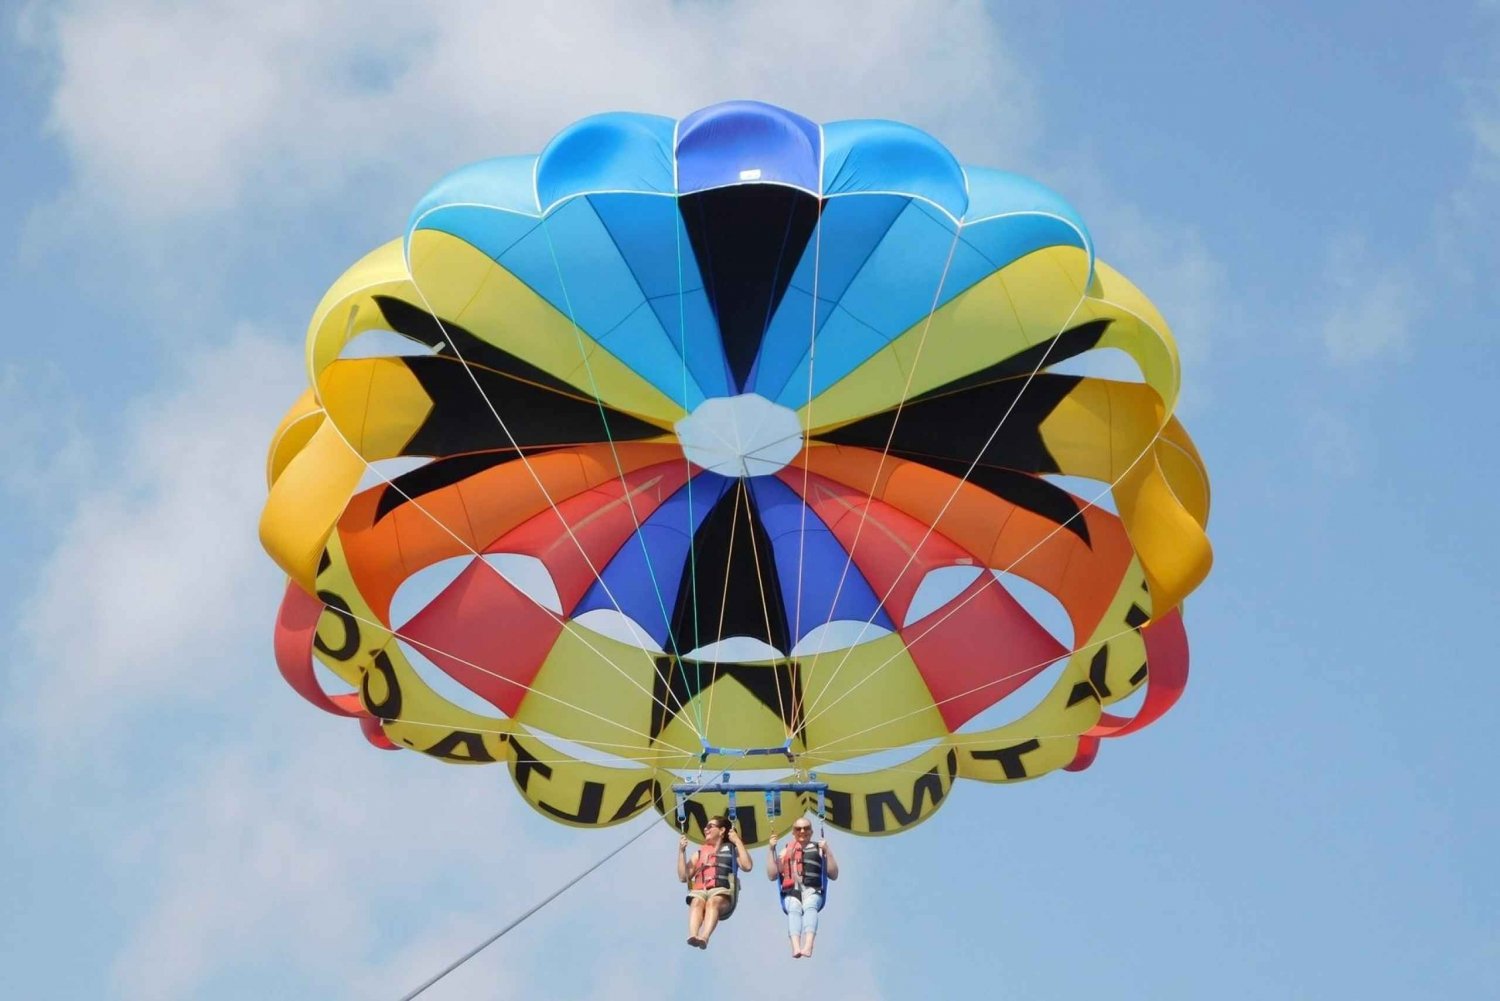 St. Julian's: Parasailing Experience with Photos and Videos